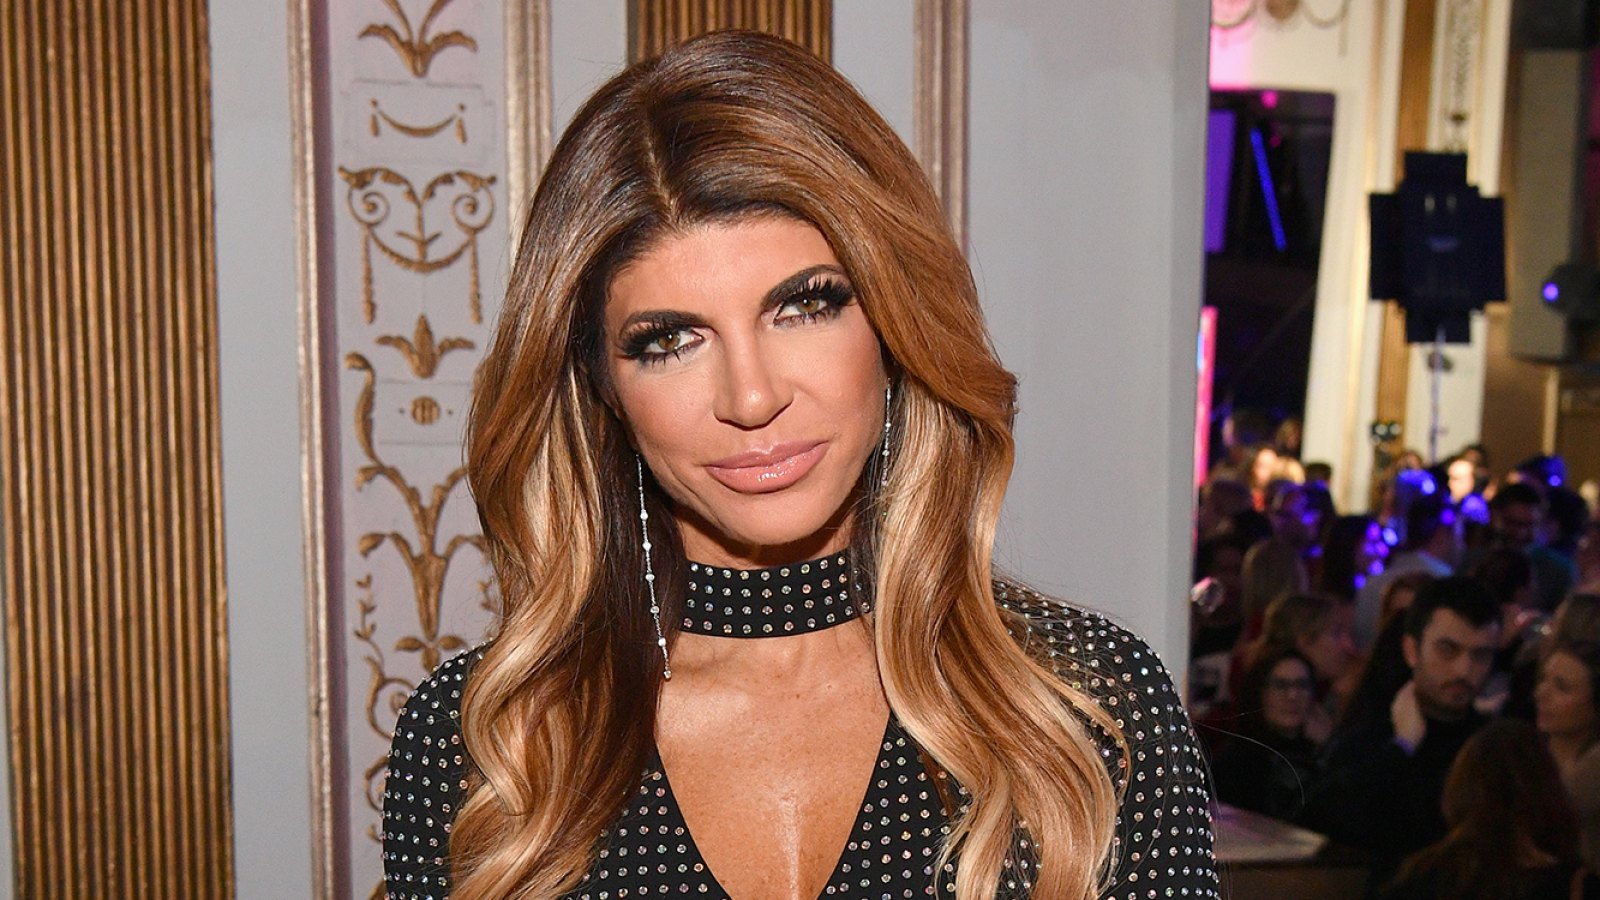 Teresa Giudice Shamed for 9-Year-Old Daughter’s ‘Inappropriate’ Outfit